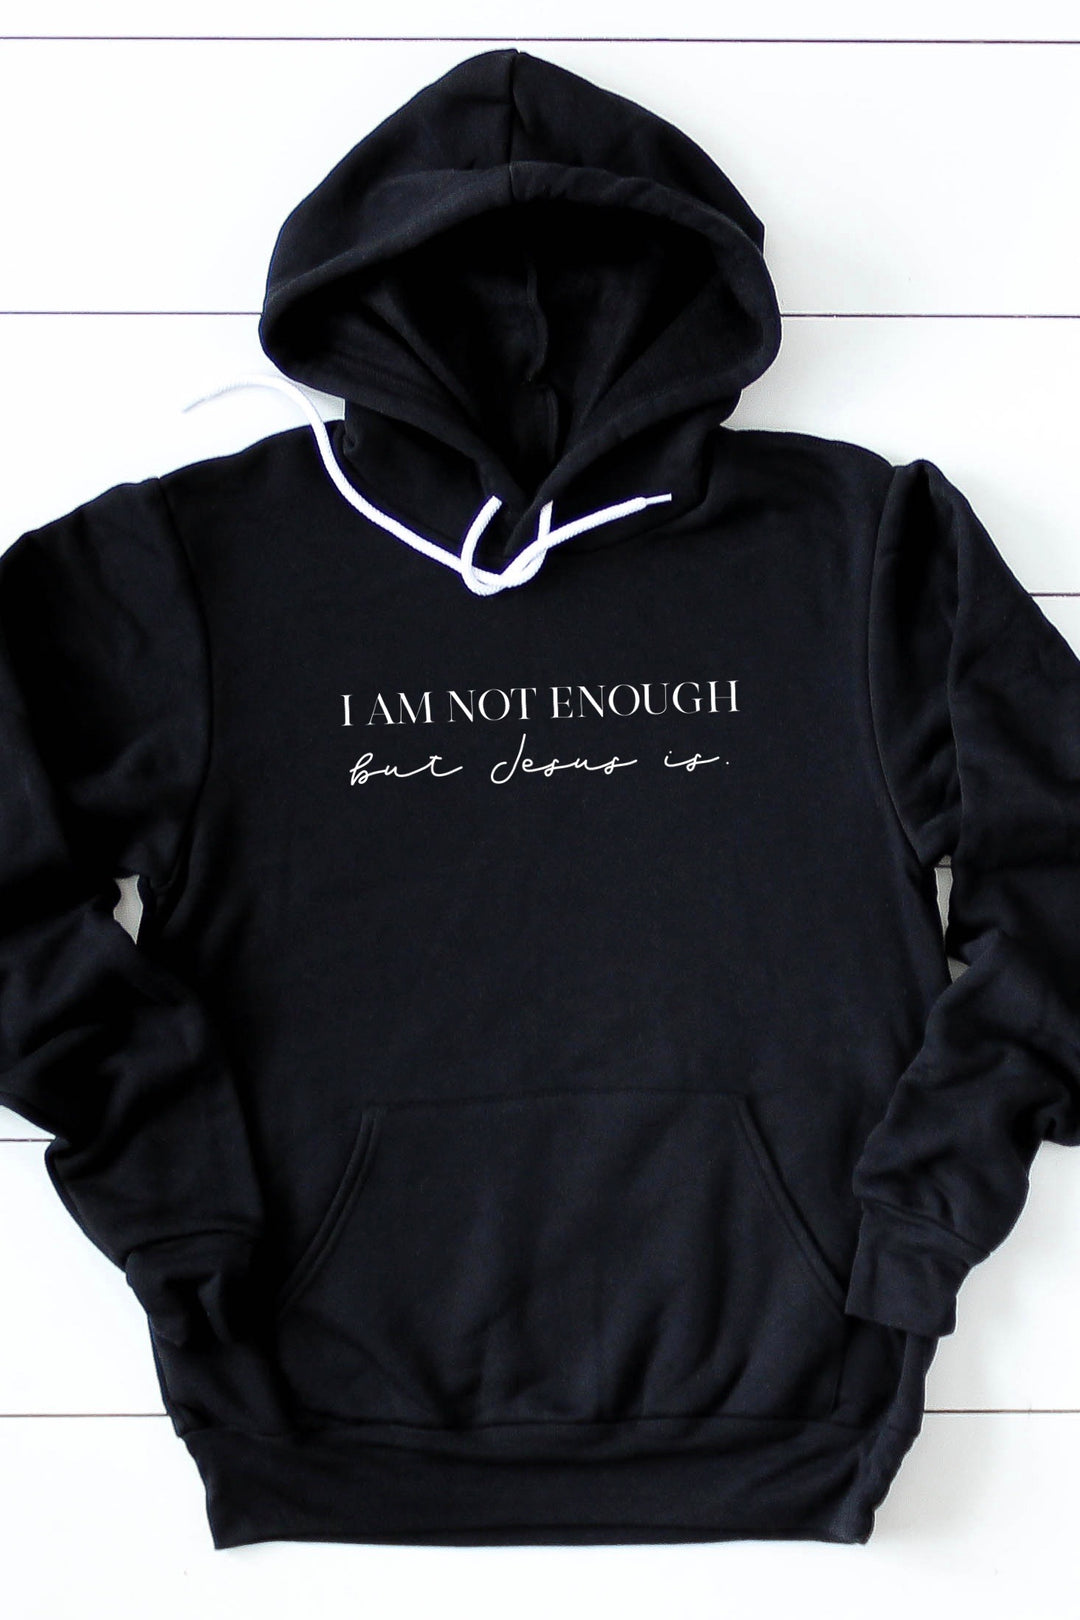 "I Am Not Enough" Hoodie